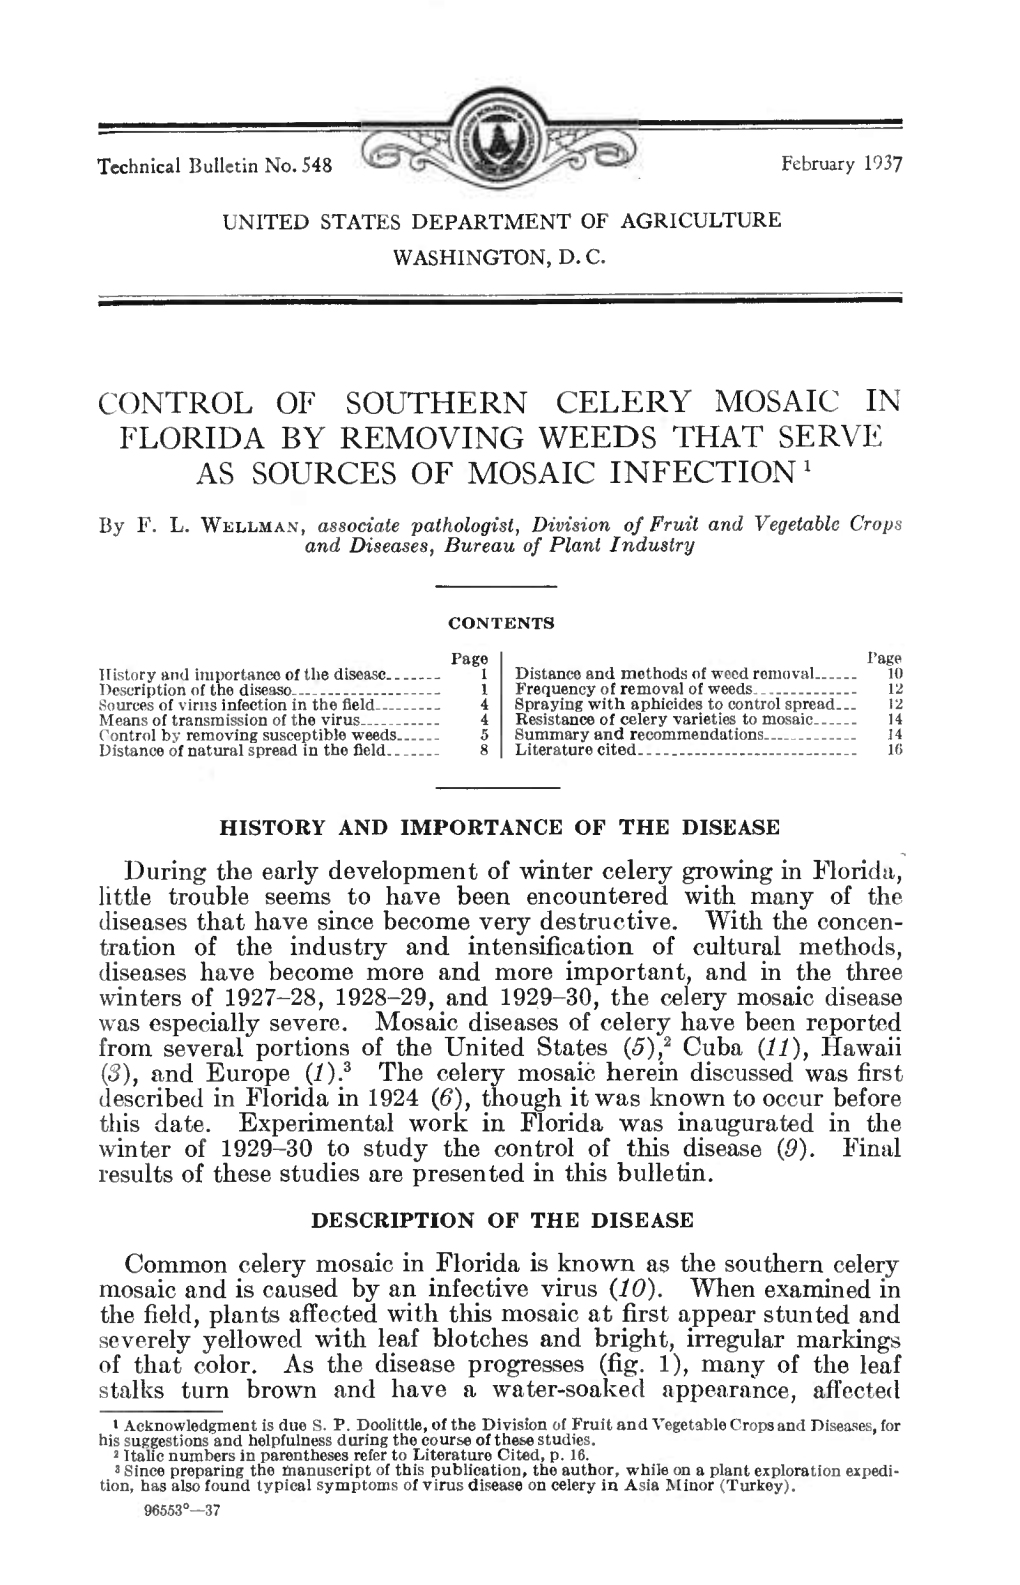 Control of Southern Celery Mosaic in Florida by Removing Weeds That Serve As Sources of Mosaic Infection '